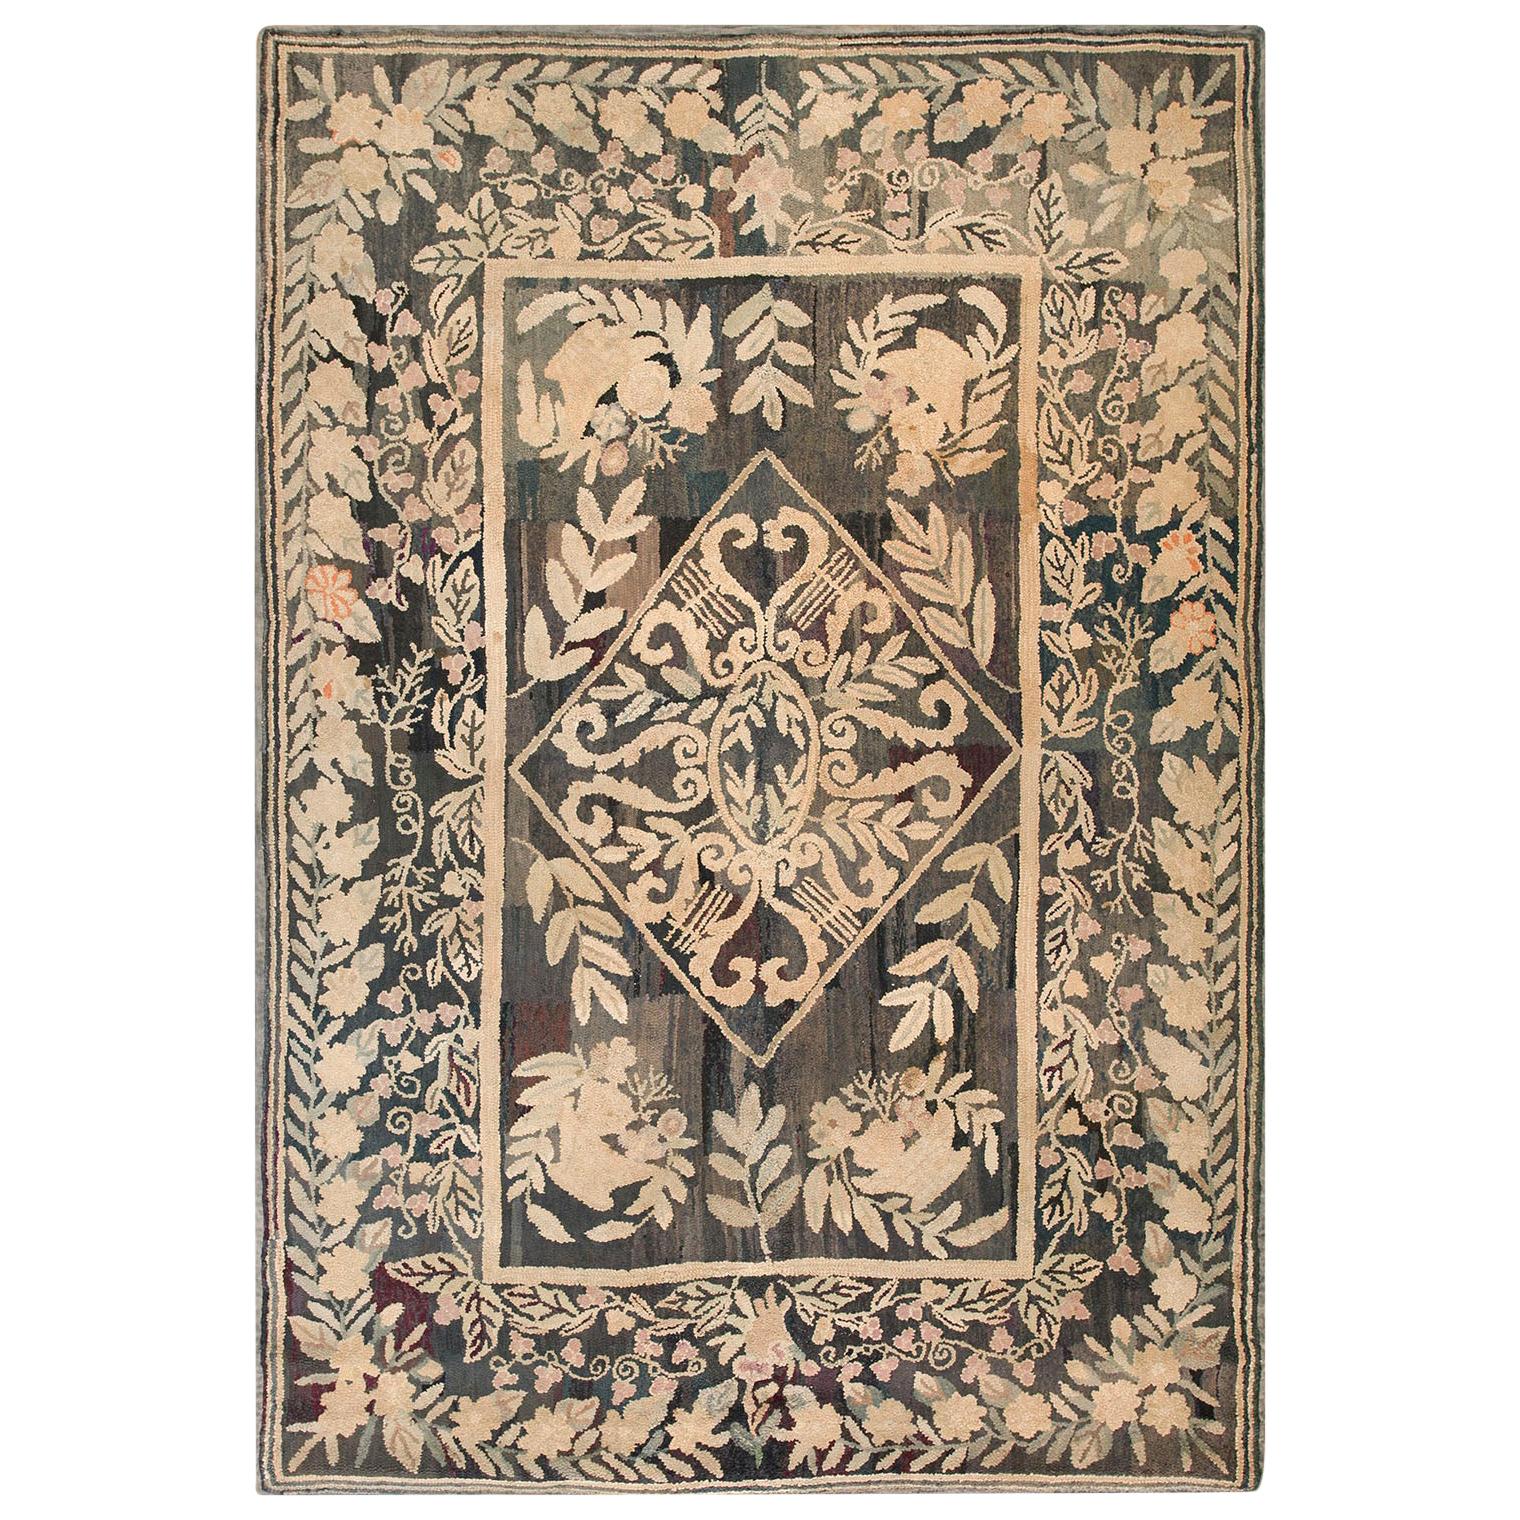 Antique American Hooked Rug 6' 0" x 9' 0" For Sale